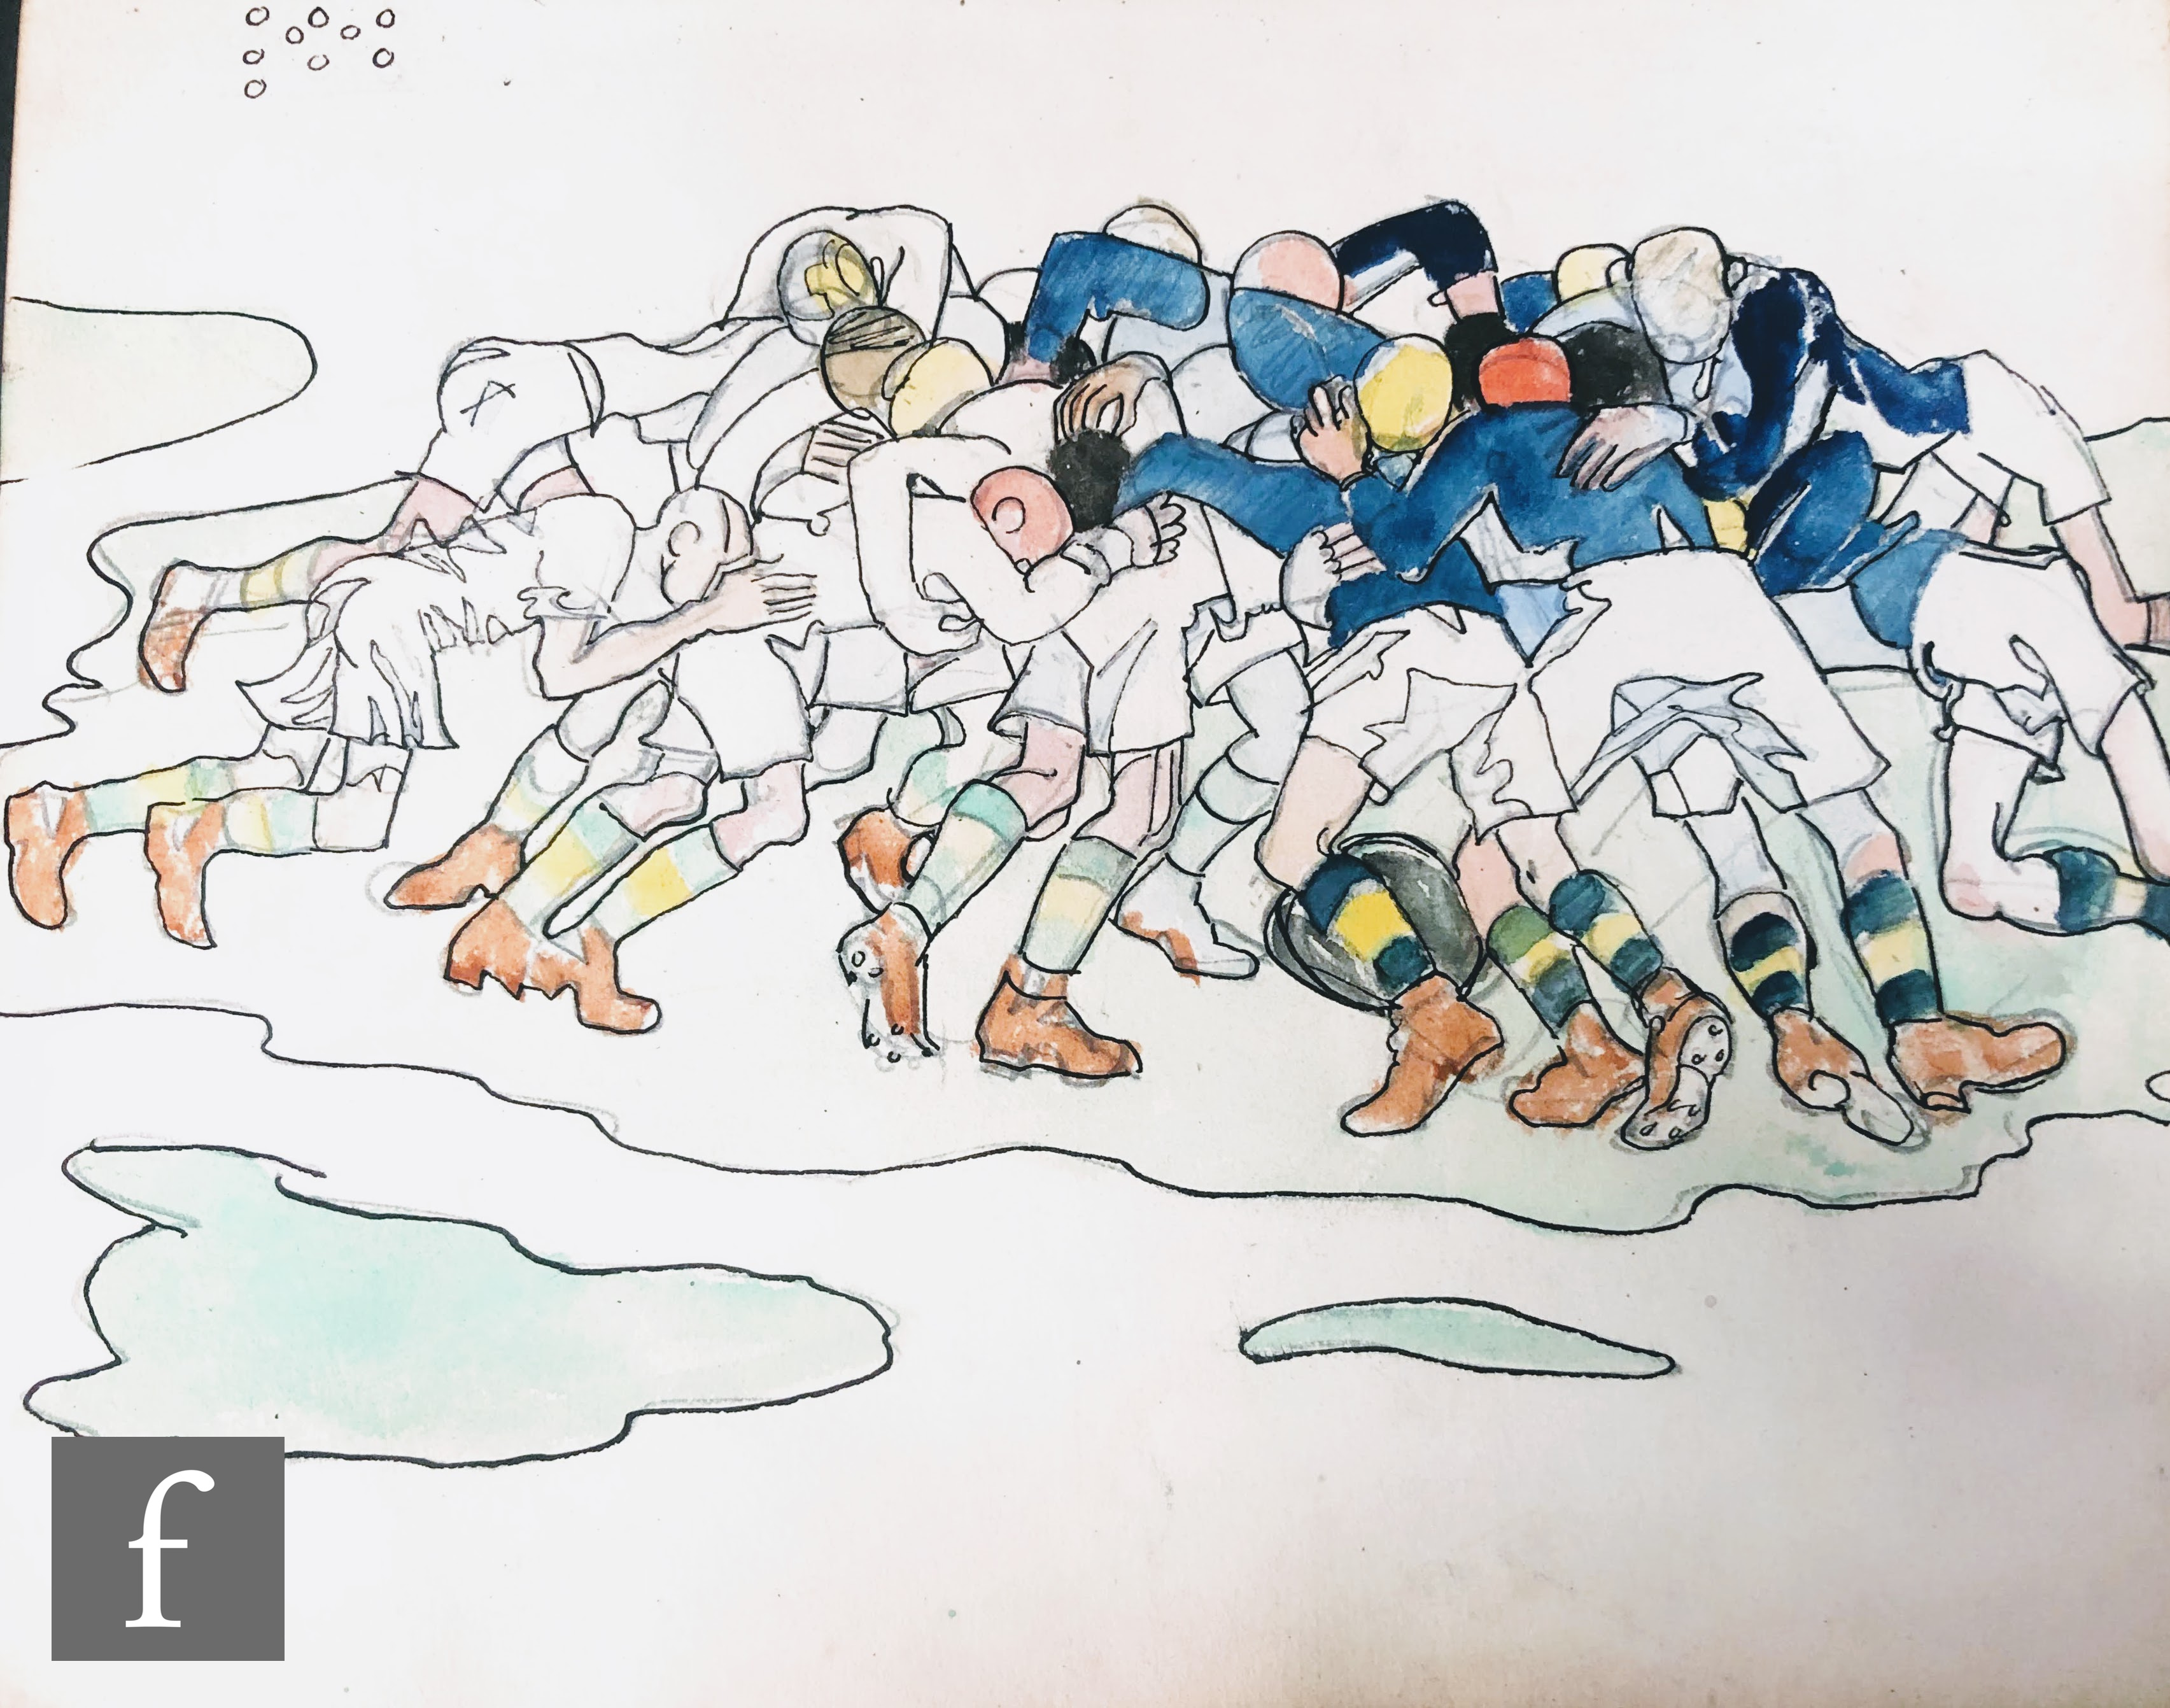 ALBERT WAINWRIGHT (1898-1943) - A sketch depicting a group of young men playing rugby in full scrum,